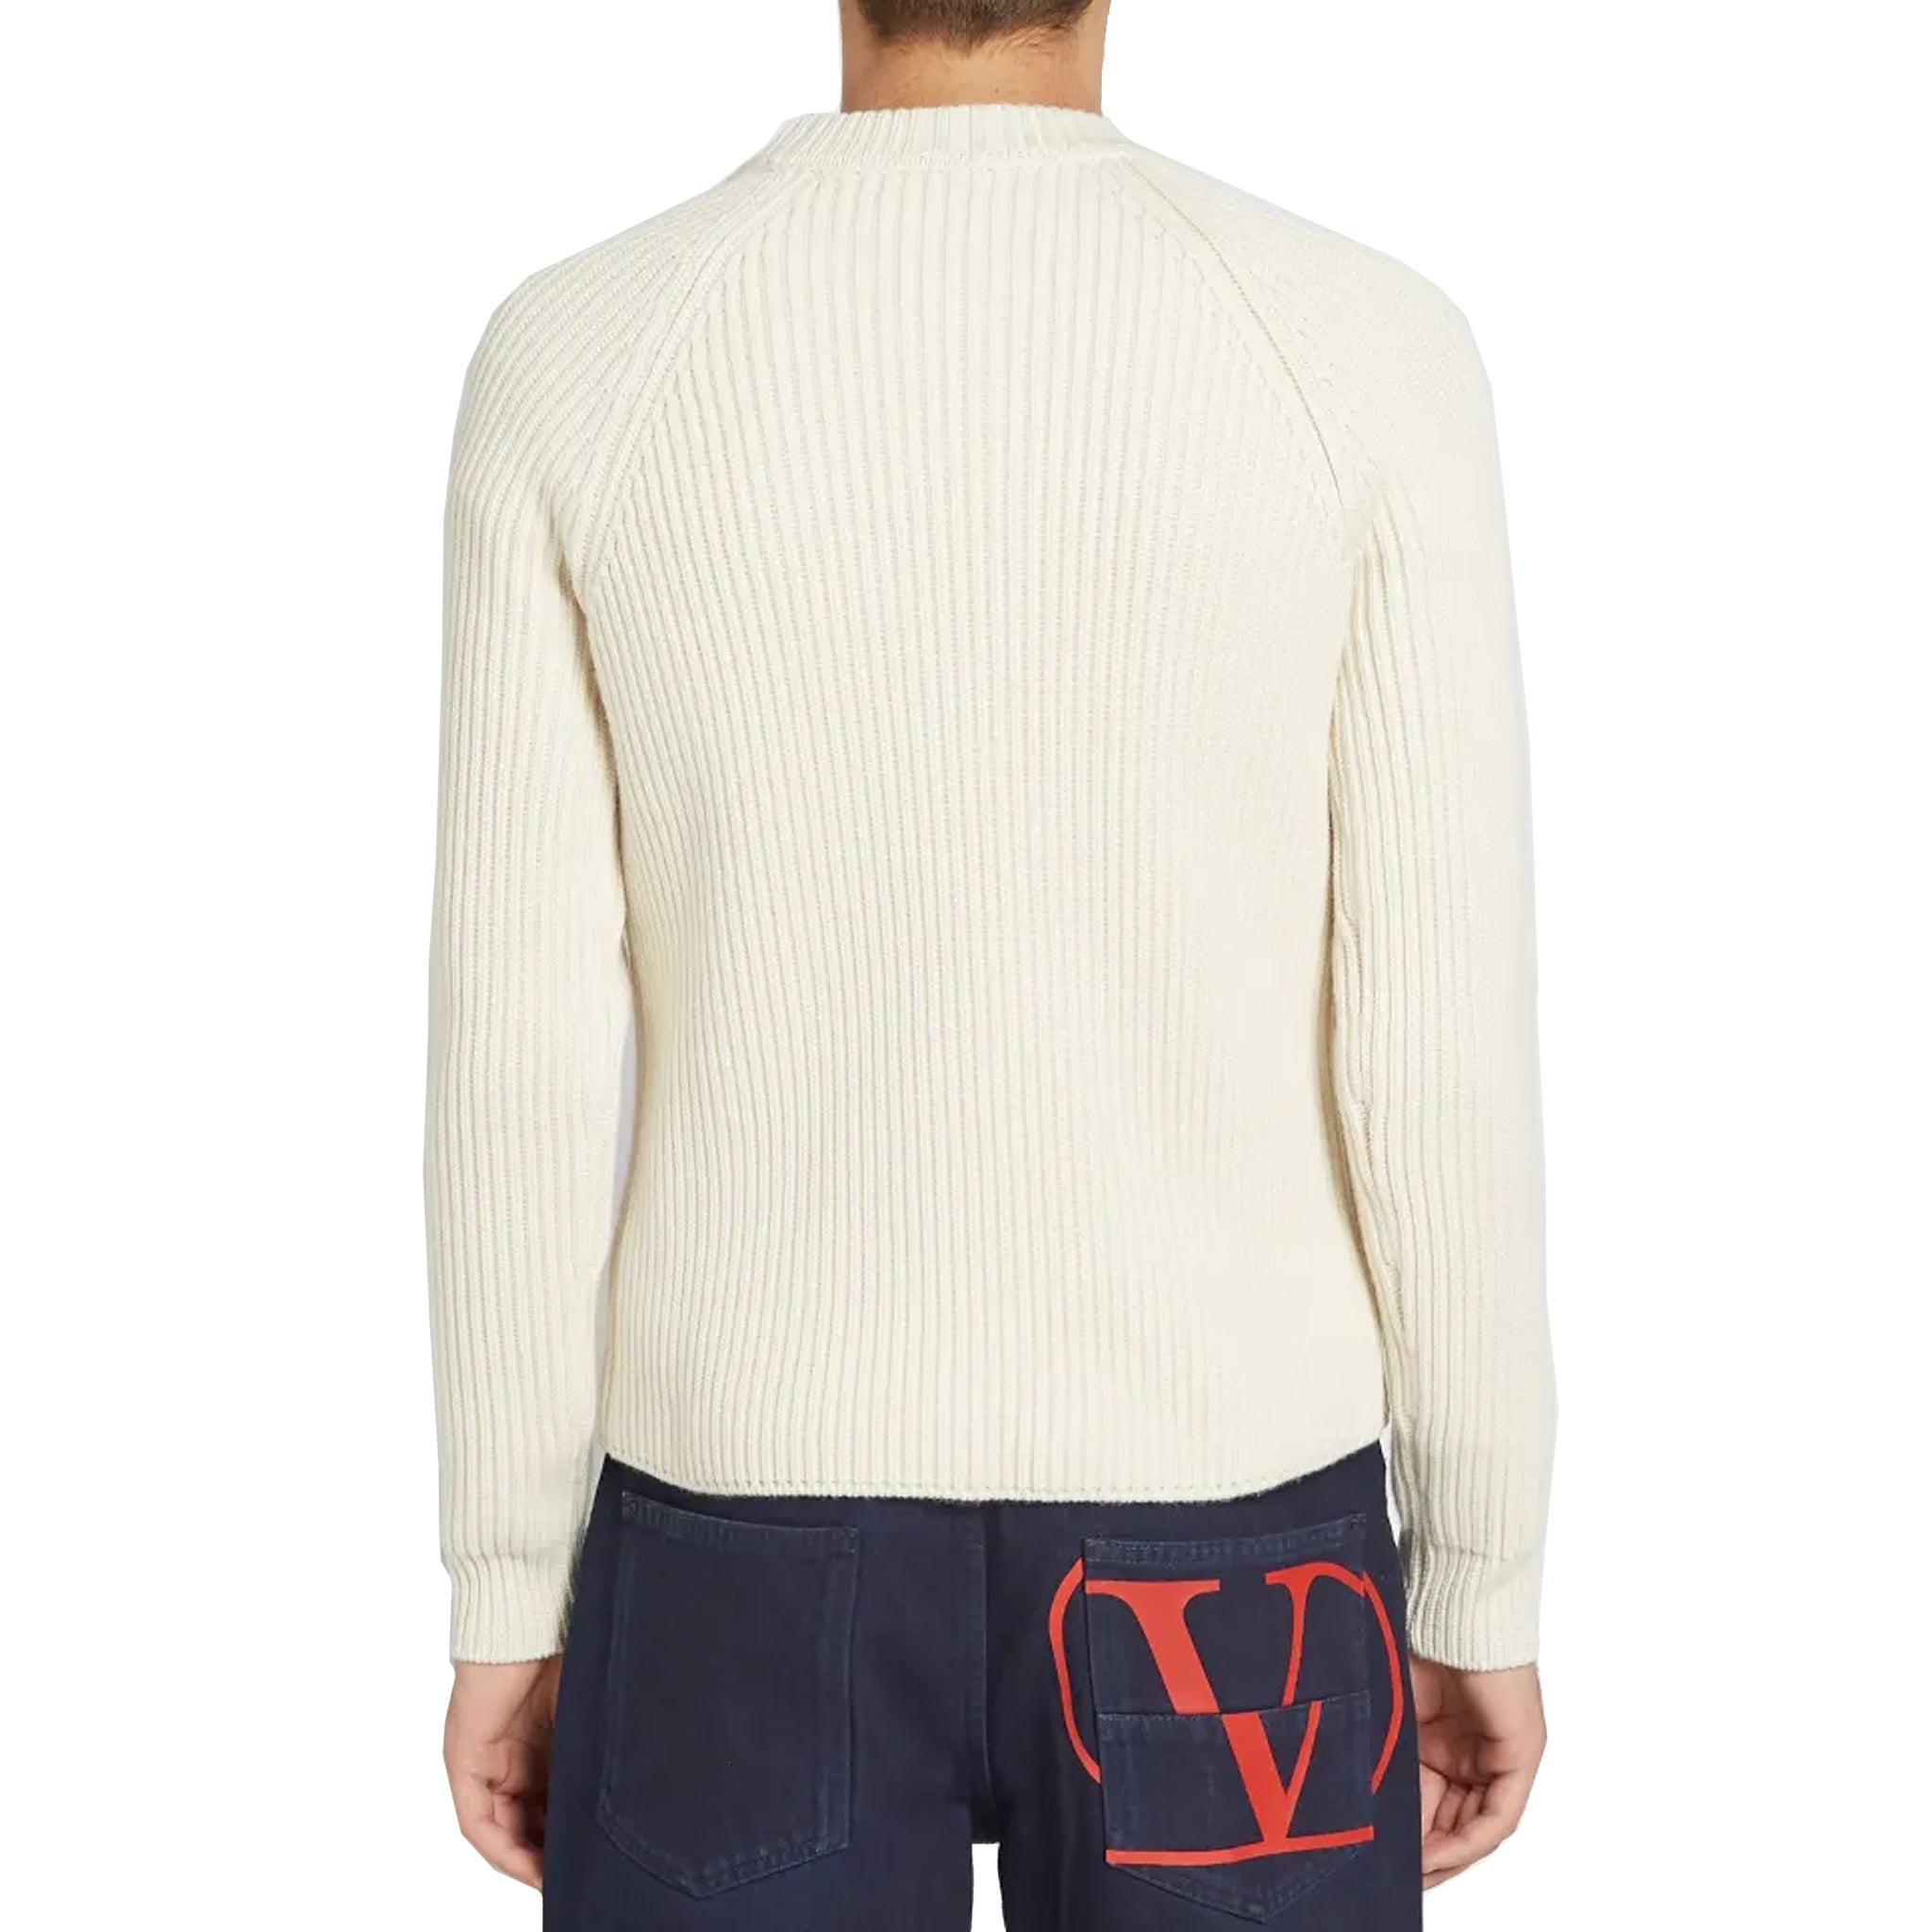 Saint Laurent Wool And Cashmere Sweater